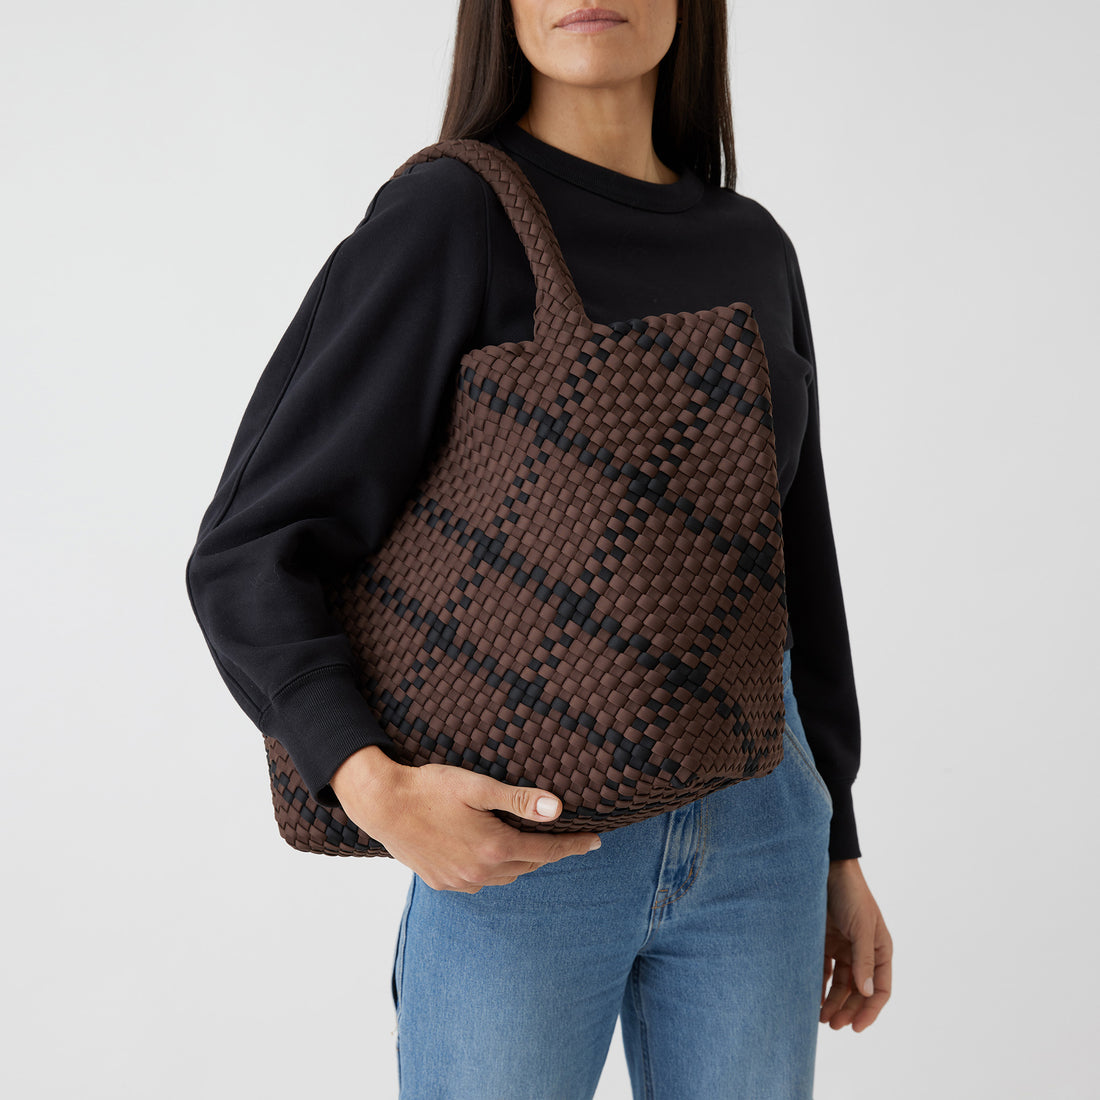 Andreina Bags Siempre tote bag in brown colour with black criss cross stripes. Colour name is cocoa. Large size yet lightweight. Handmade, interlaced material, synthetic material, water resistant, machine washable. Designed in Sydney, Australia.